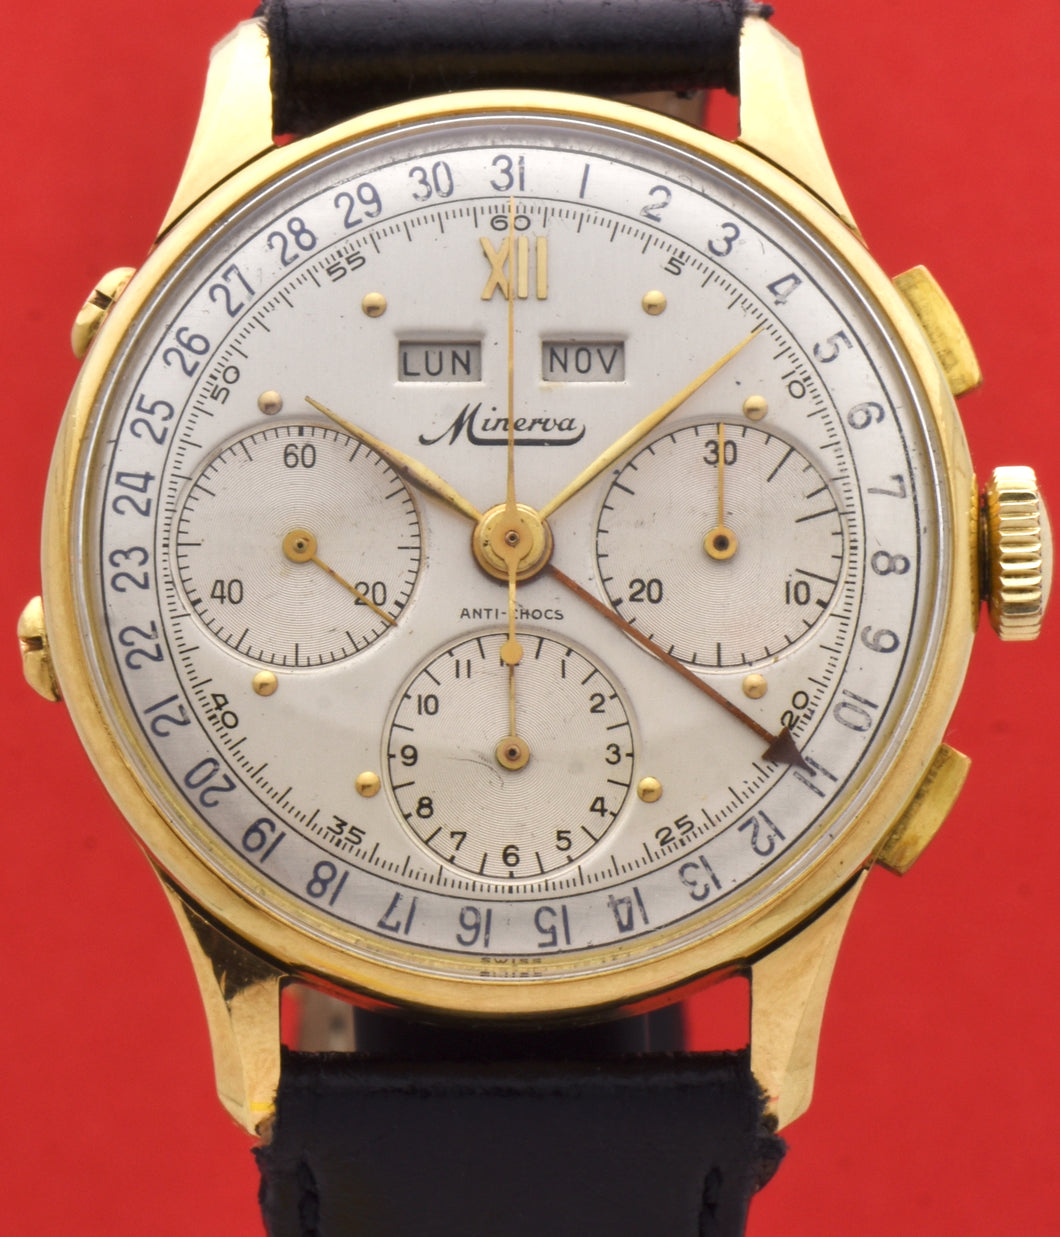 Minerva, triple calendar chronograph, made circa 1955. Dial: Brushed silver with applied Roman numeral at 12 and gold markers, outer minutes and 1/5th seconds track, subsidiary dials for the seconds, the 12-hour and 30-minute registers, apertures for the days of the week and months in French. Thin hands. Signed Minerva.